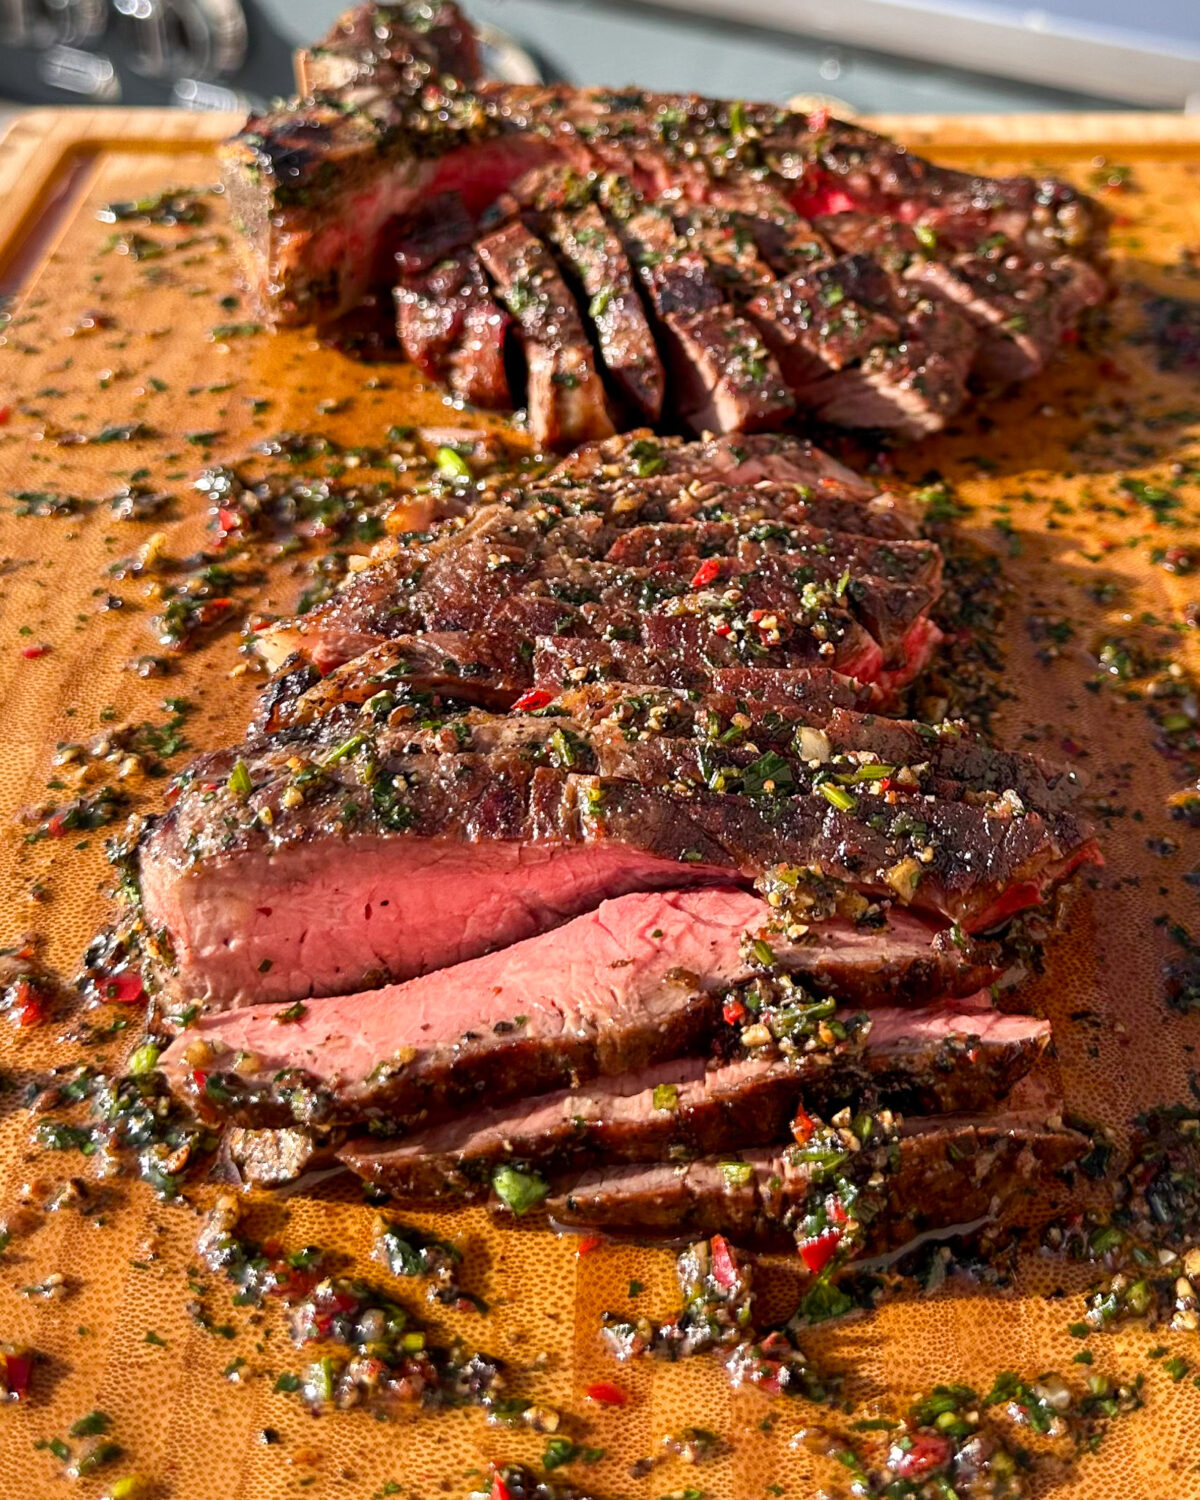 A medium-rare T-bone is sliced and on a board with a peppercorn sauce.